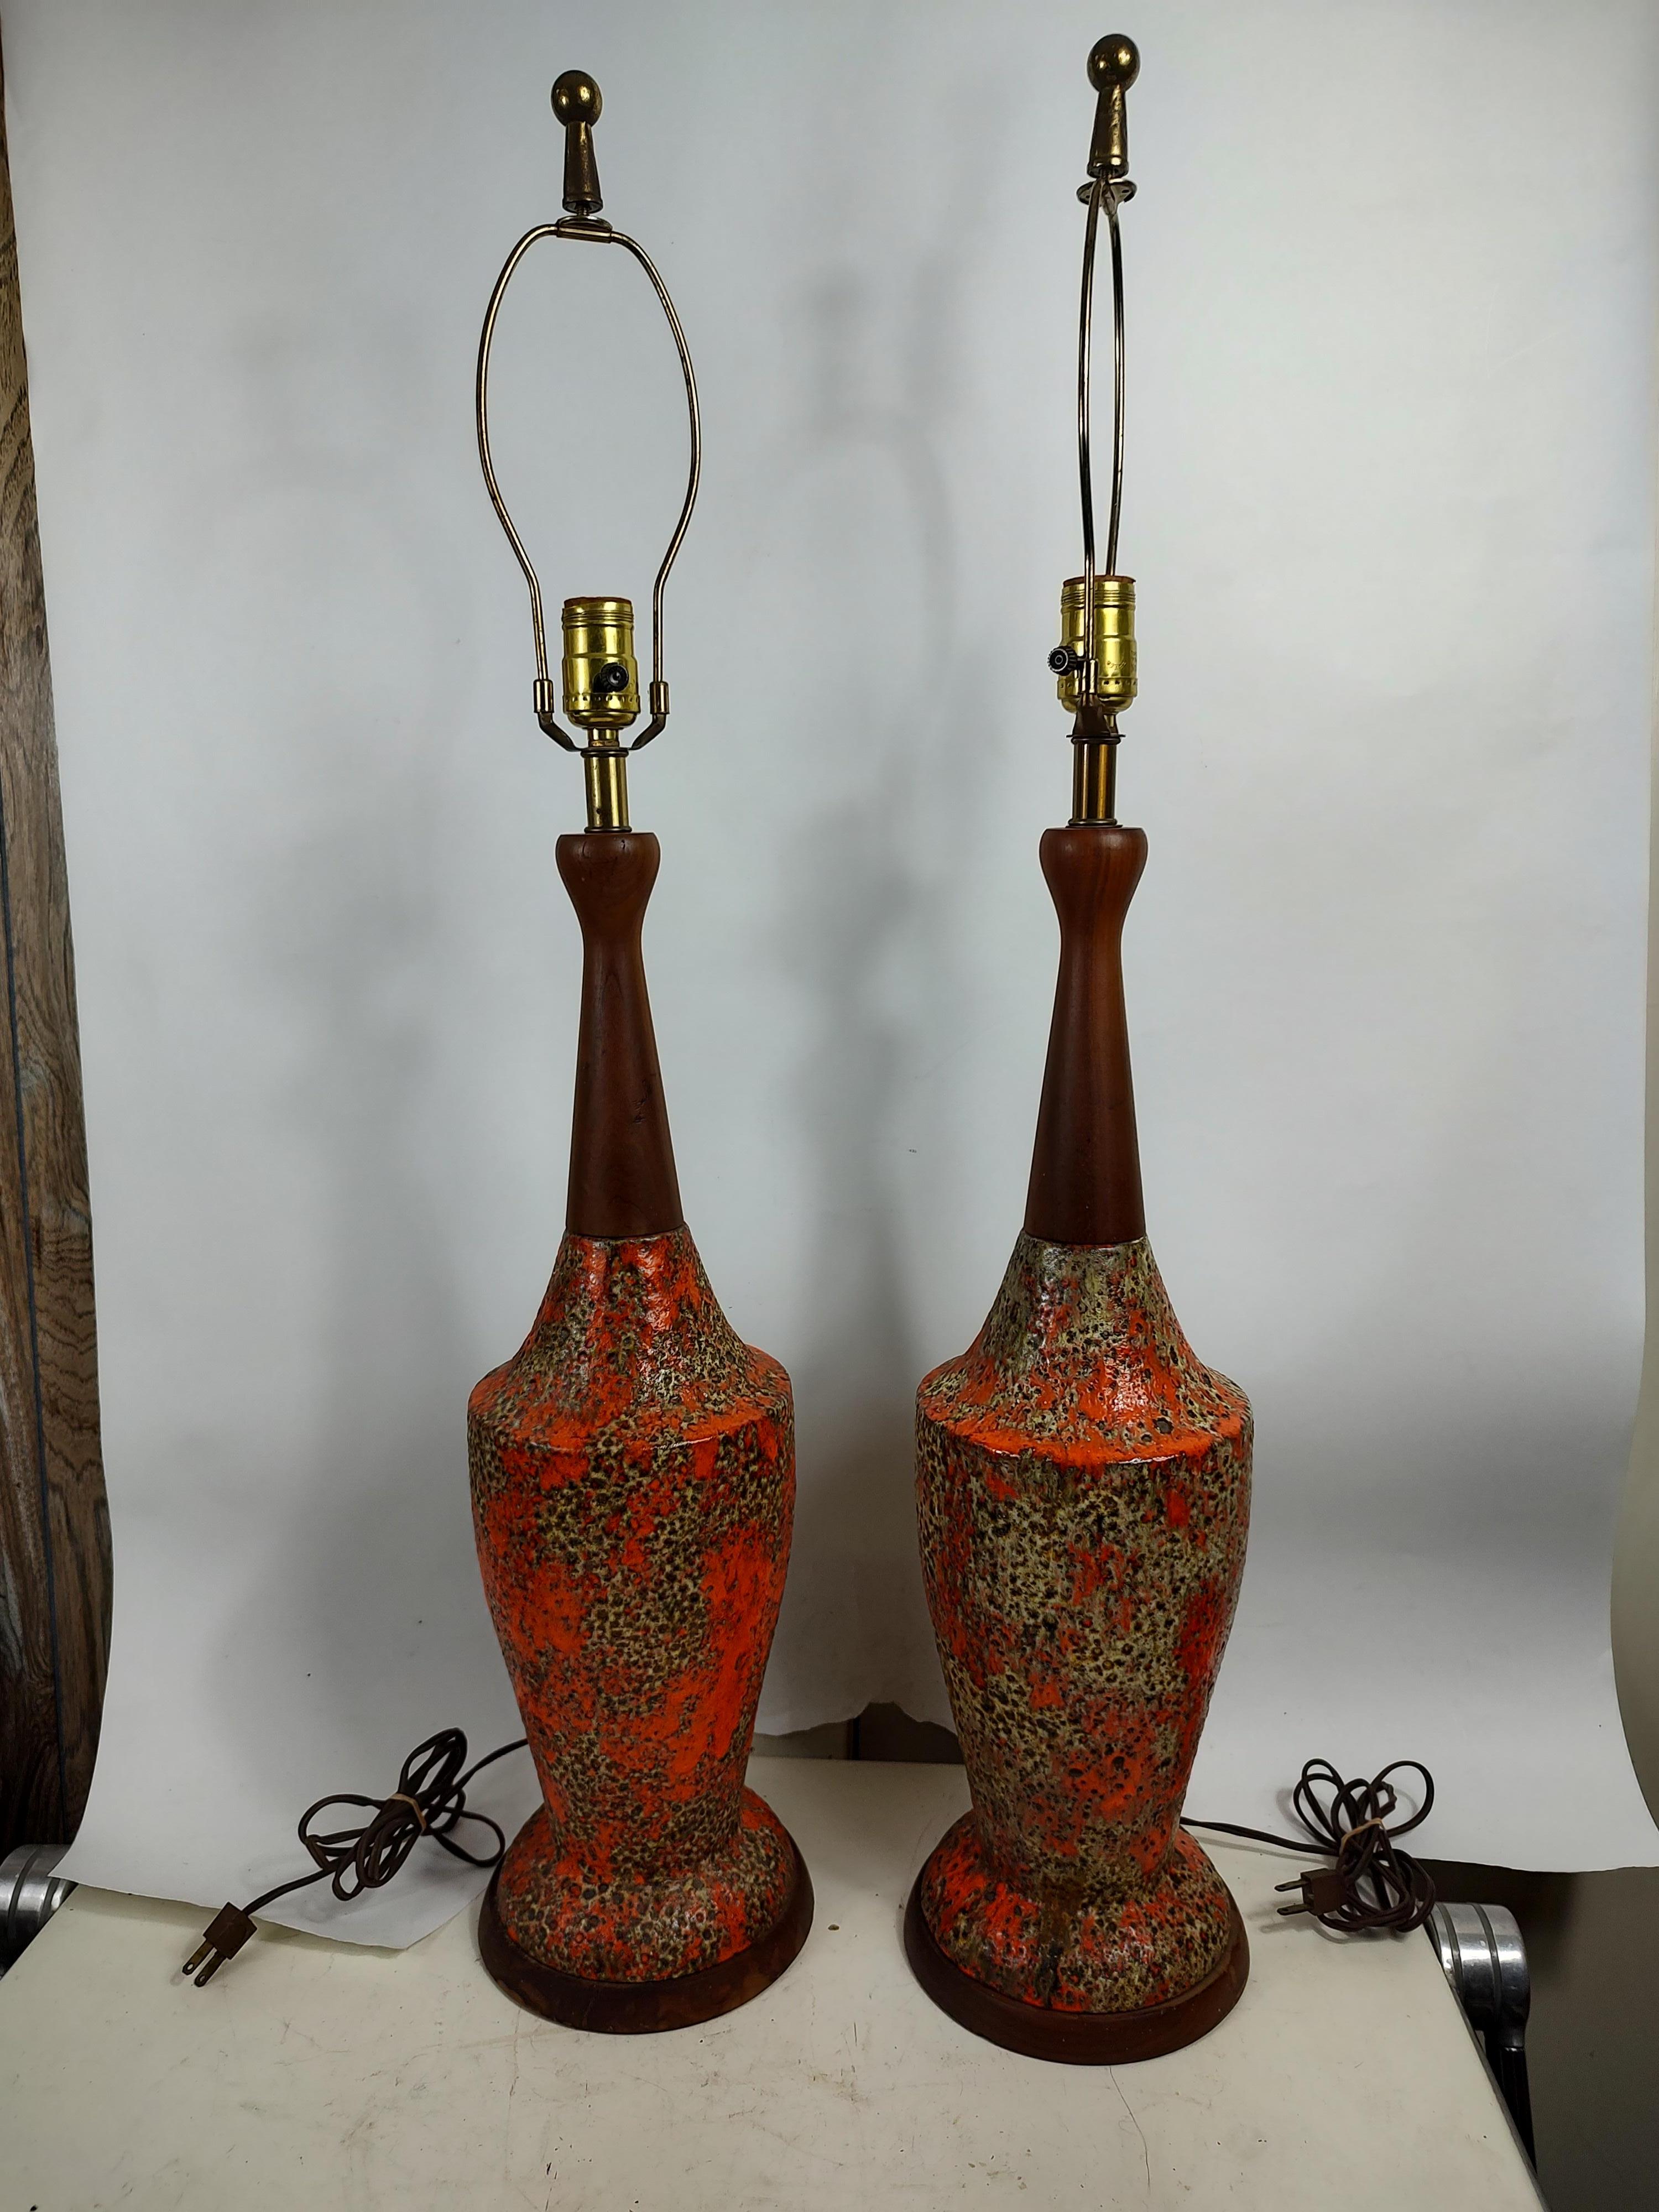 Pair of Mid-Century Modern Sculptural Walnut & Volcanic Lava Pottery Table Lamps For Sale 2